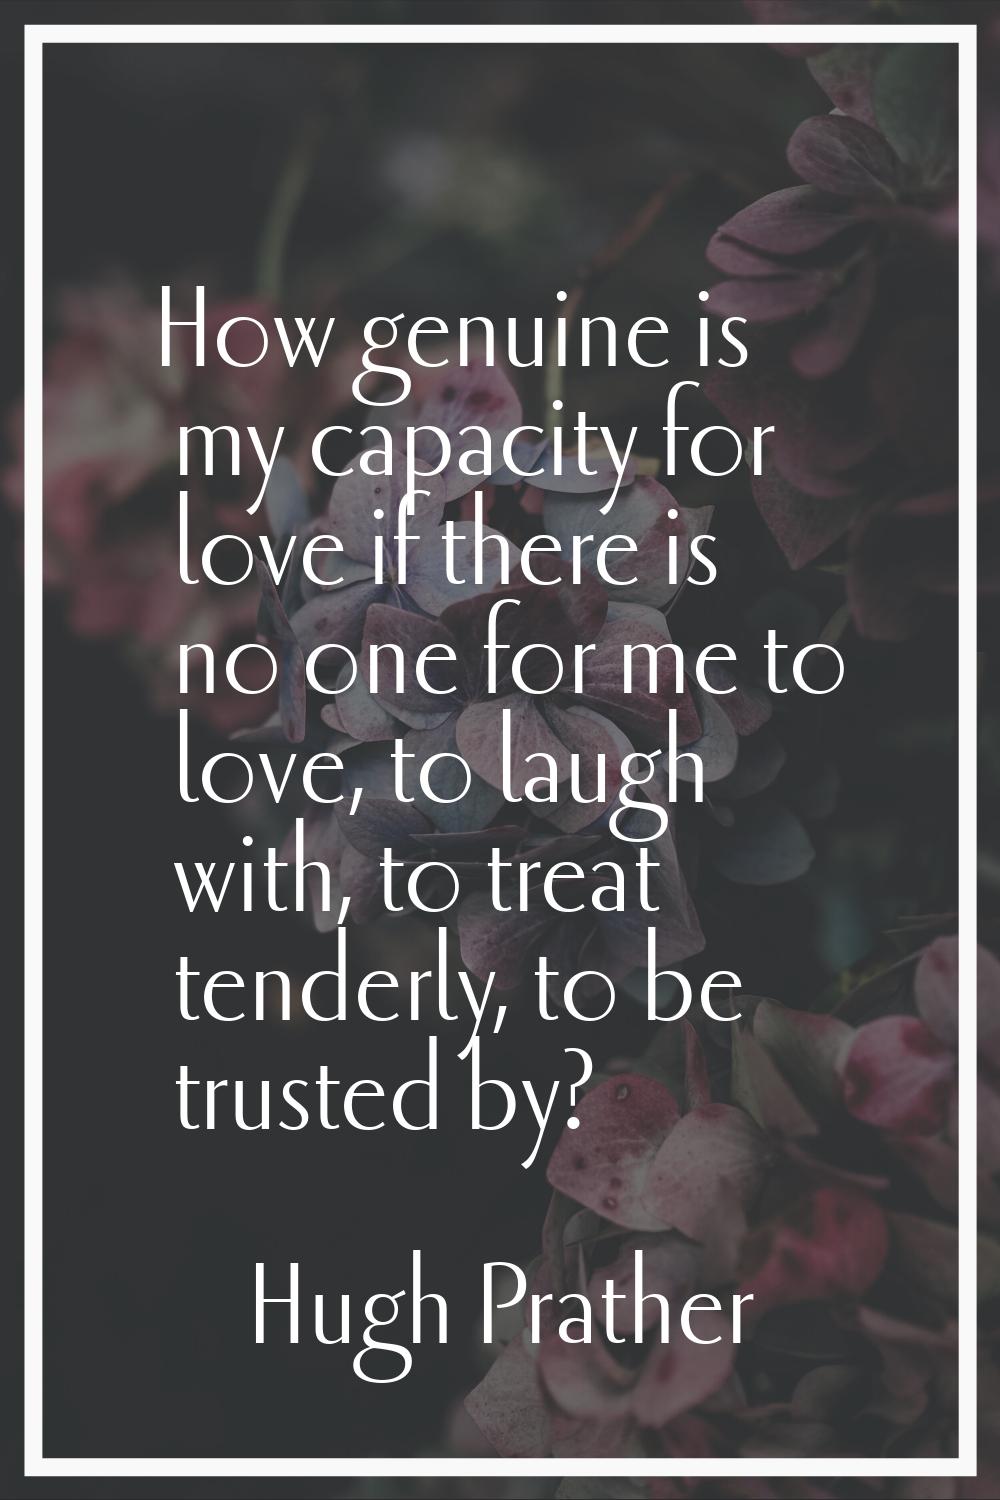 How genuine is my capacity for love if there is no one for me to love, to laugh with, to treat tend